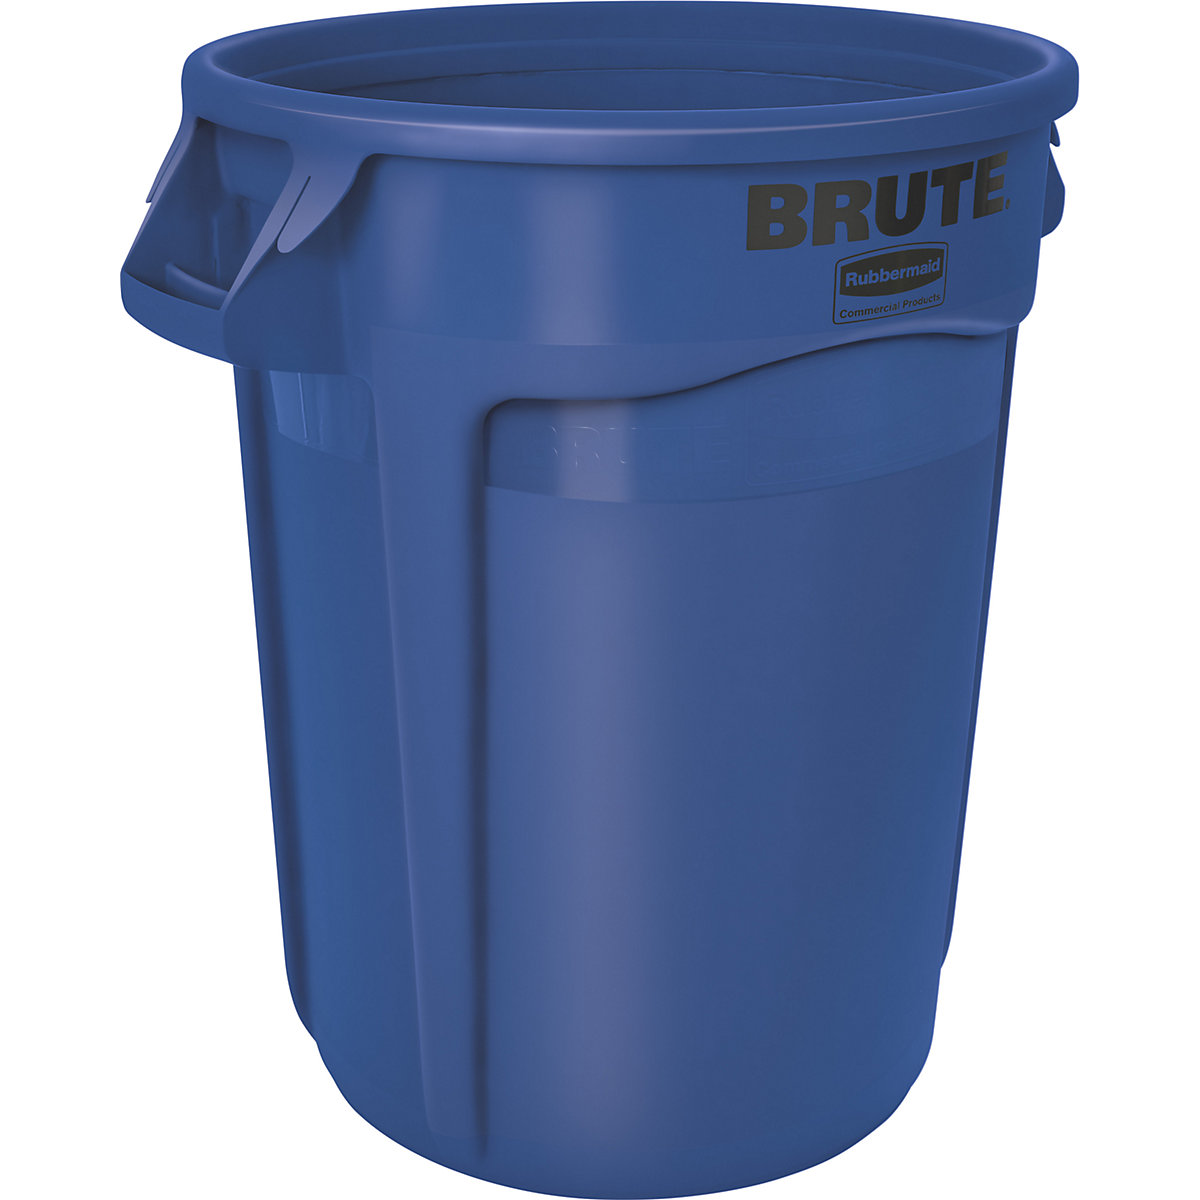 BRUTE® universal container, round – Rubbermaid, capacity 75 l, blue-8